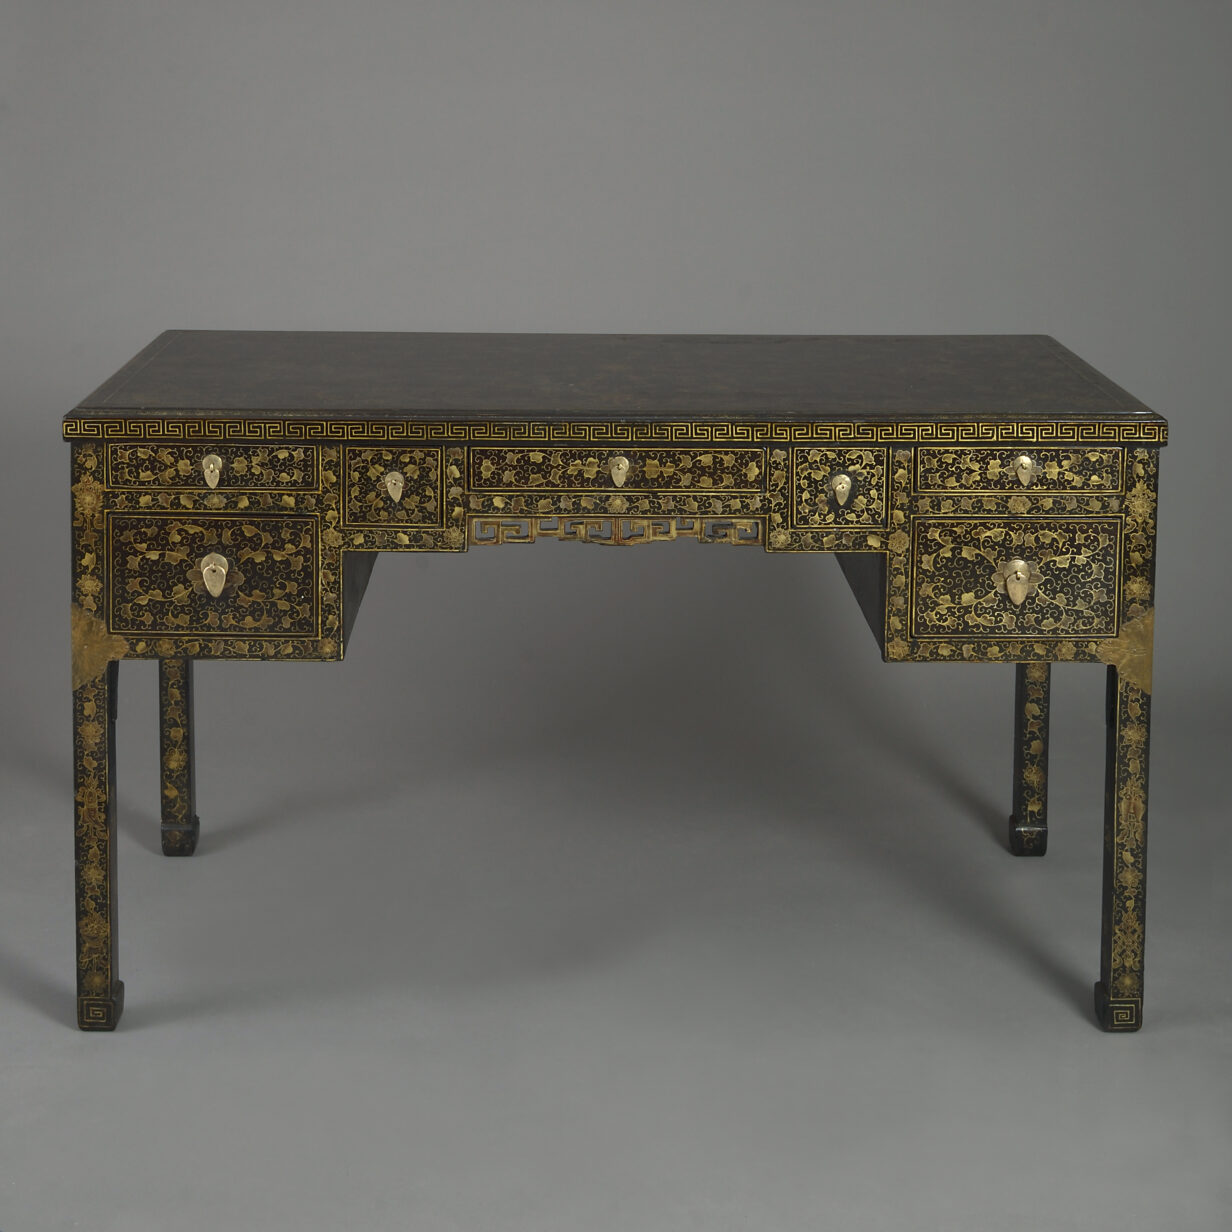 Early 20th century chinese export black lacquer desk